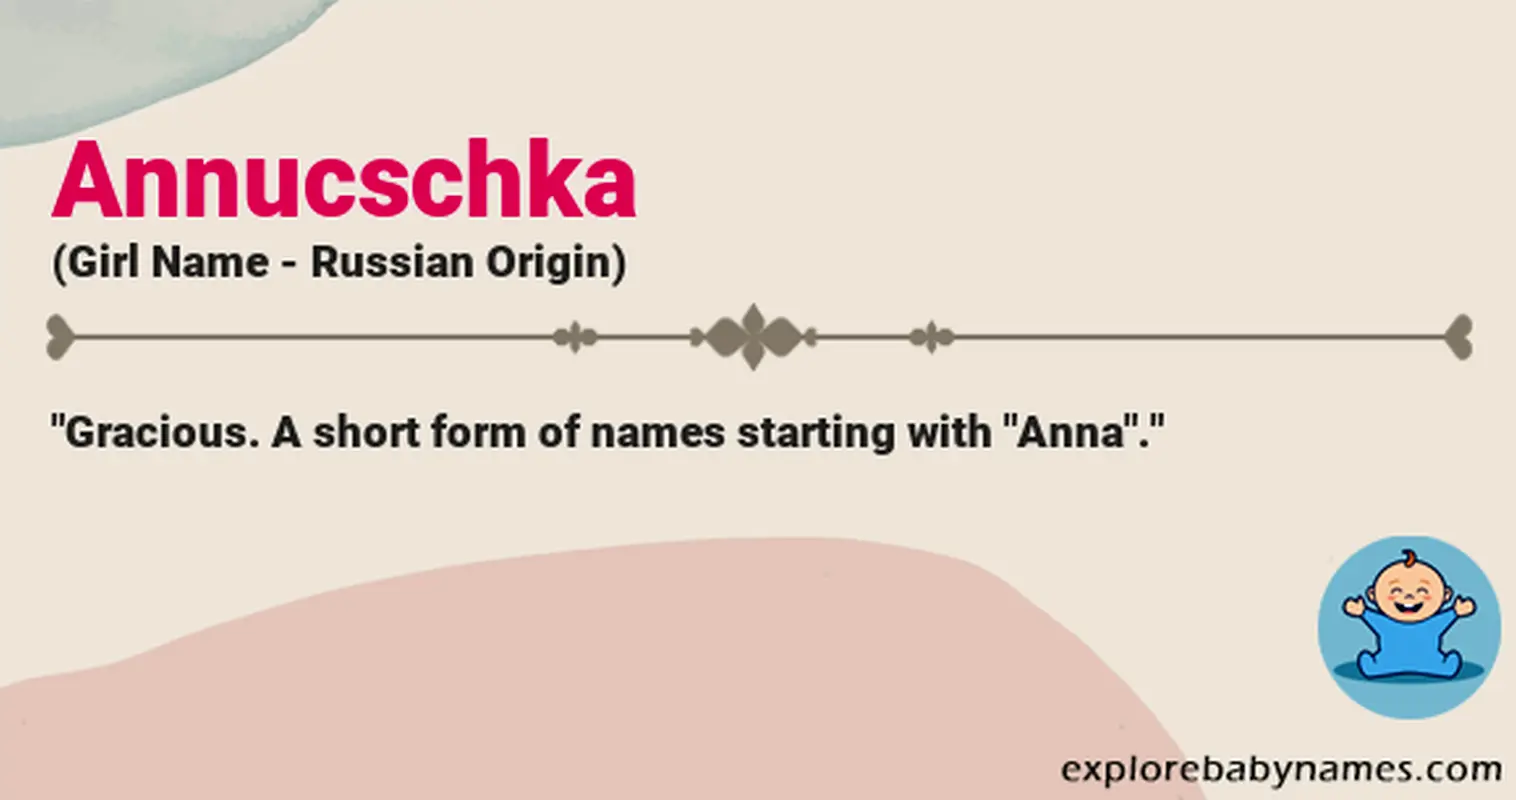 Meaning of Annucschka